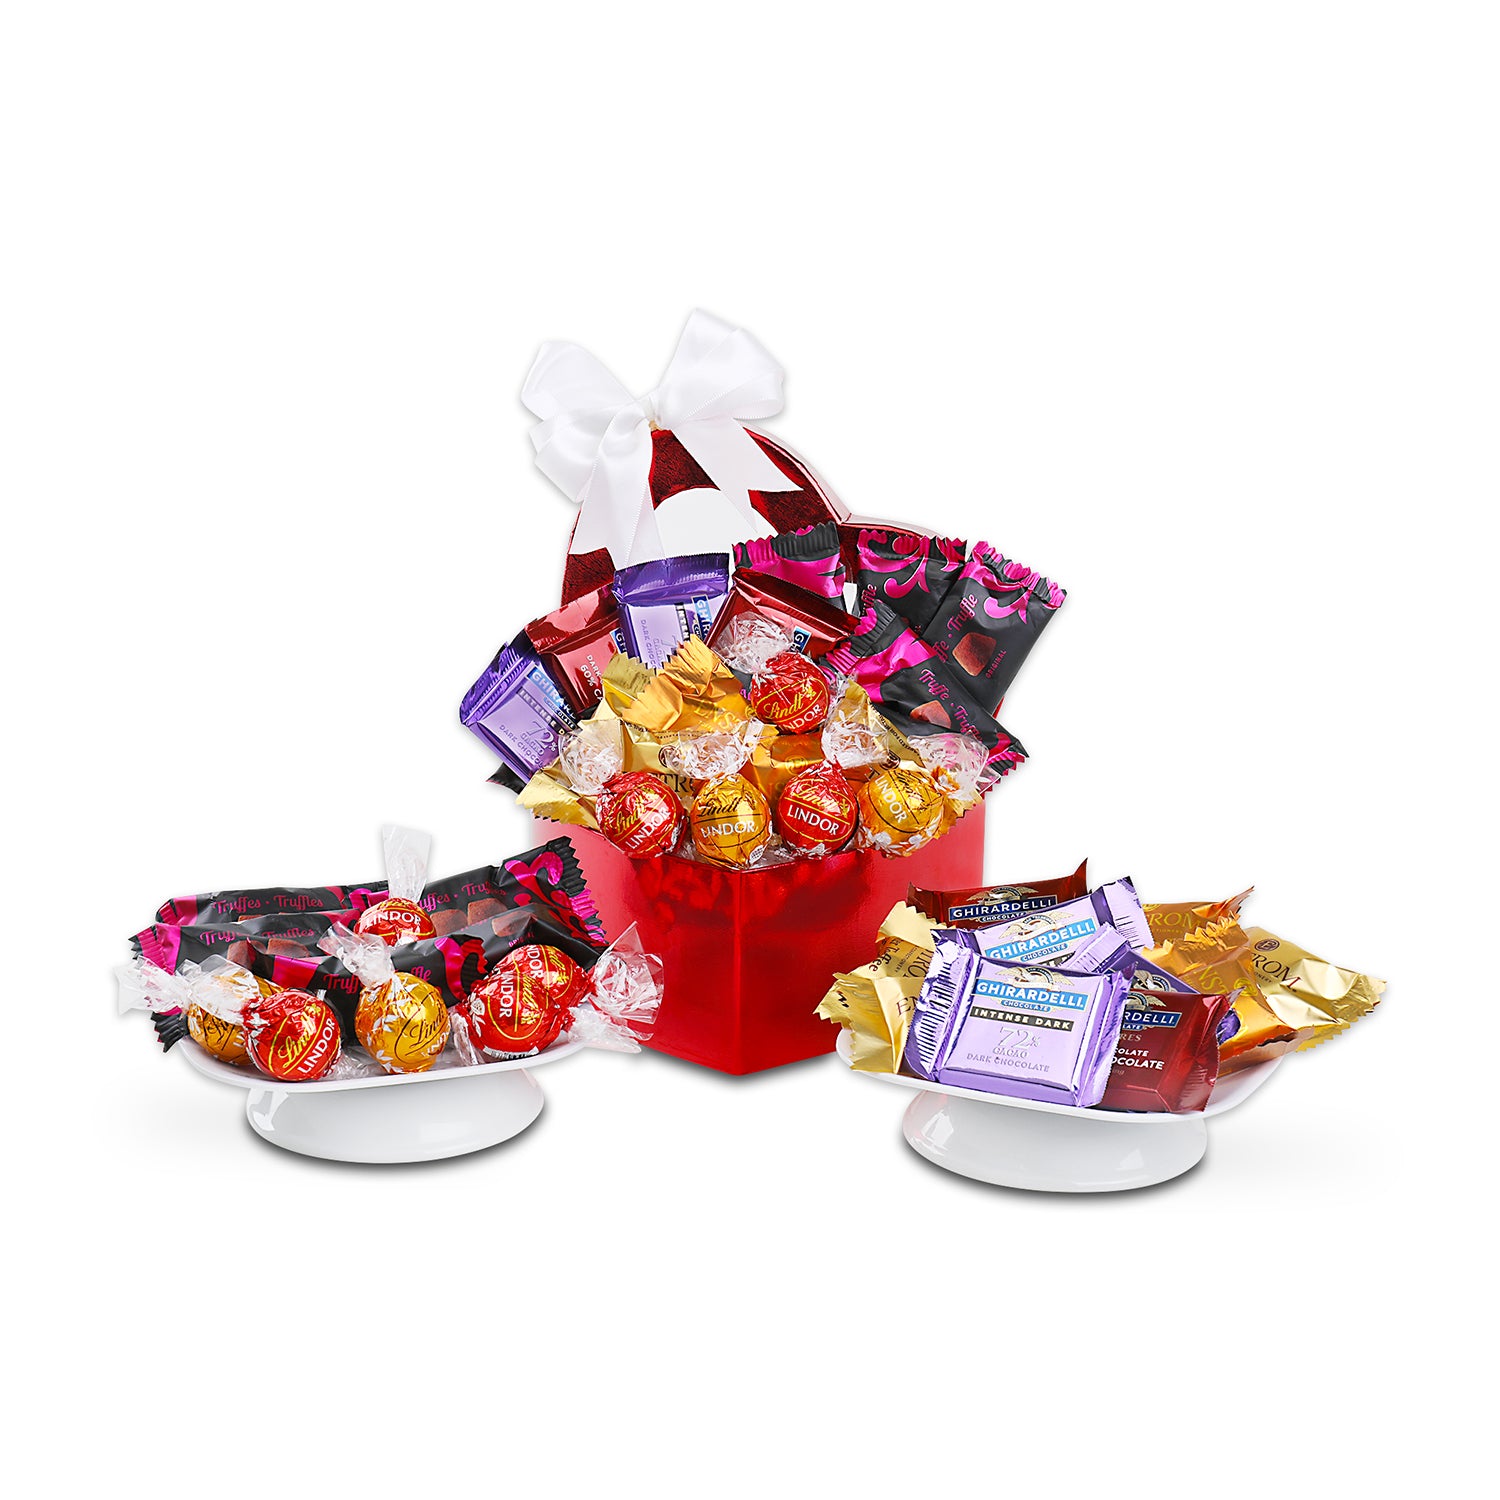 Heart gift with contents displayed on white dishes